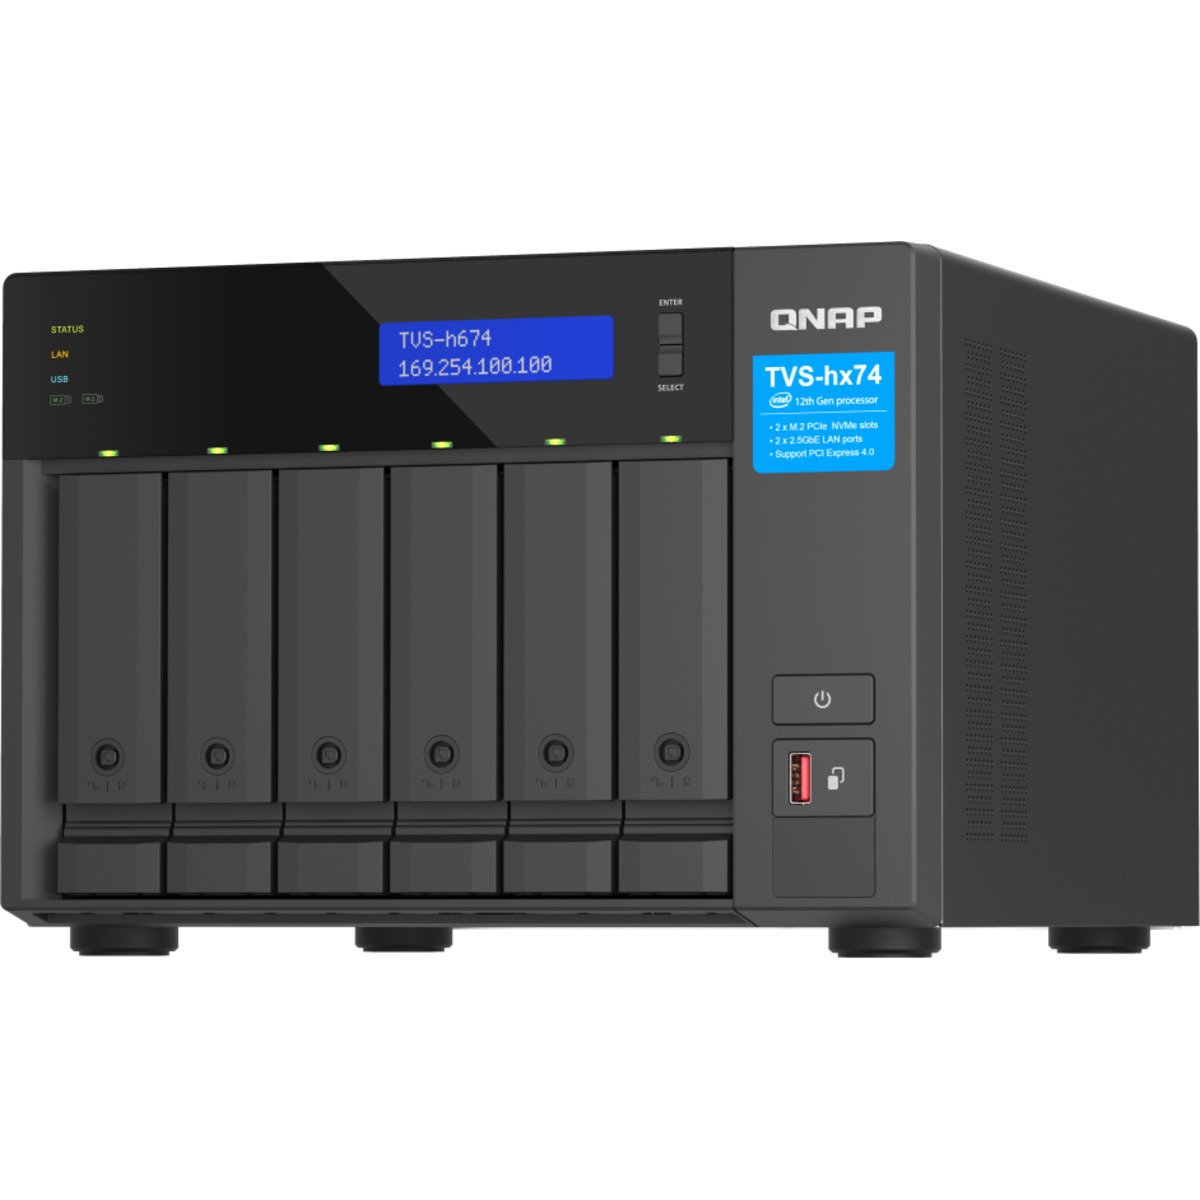 QNAP TVS-h674 Core i5 48tb 6-Bay Desktop Multimedia / Power User / Business NAS - Network Attached Storage Device 4x12tb Seagate IronWolf ST12000VN0008 3.5 7200rpm SATA 6Gb/s HDD NAS Class Drives Installed - Burn-In Tested TVS-h674 Core i5